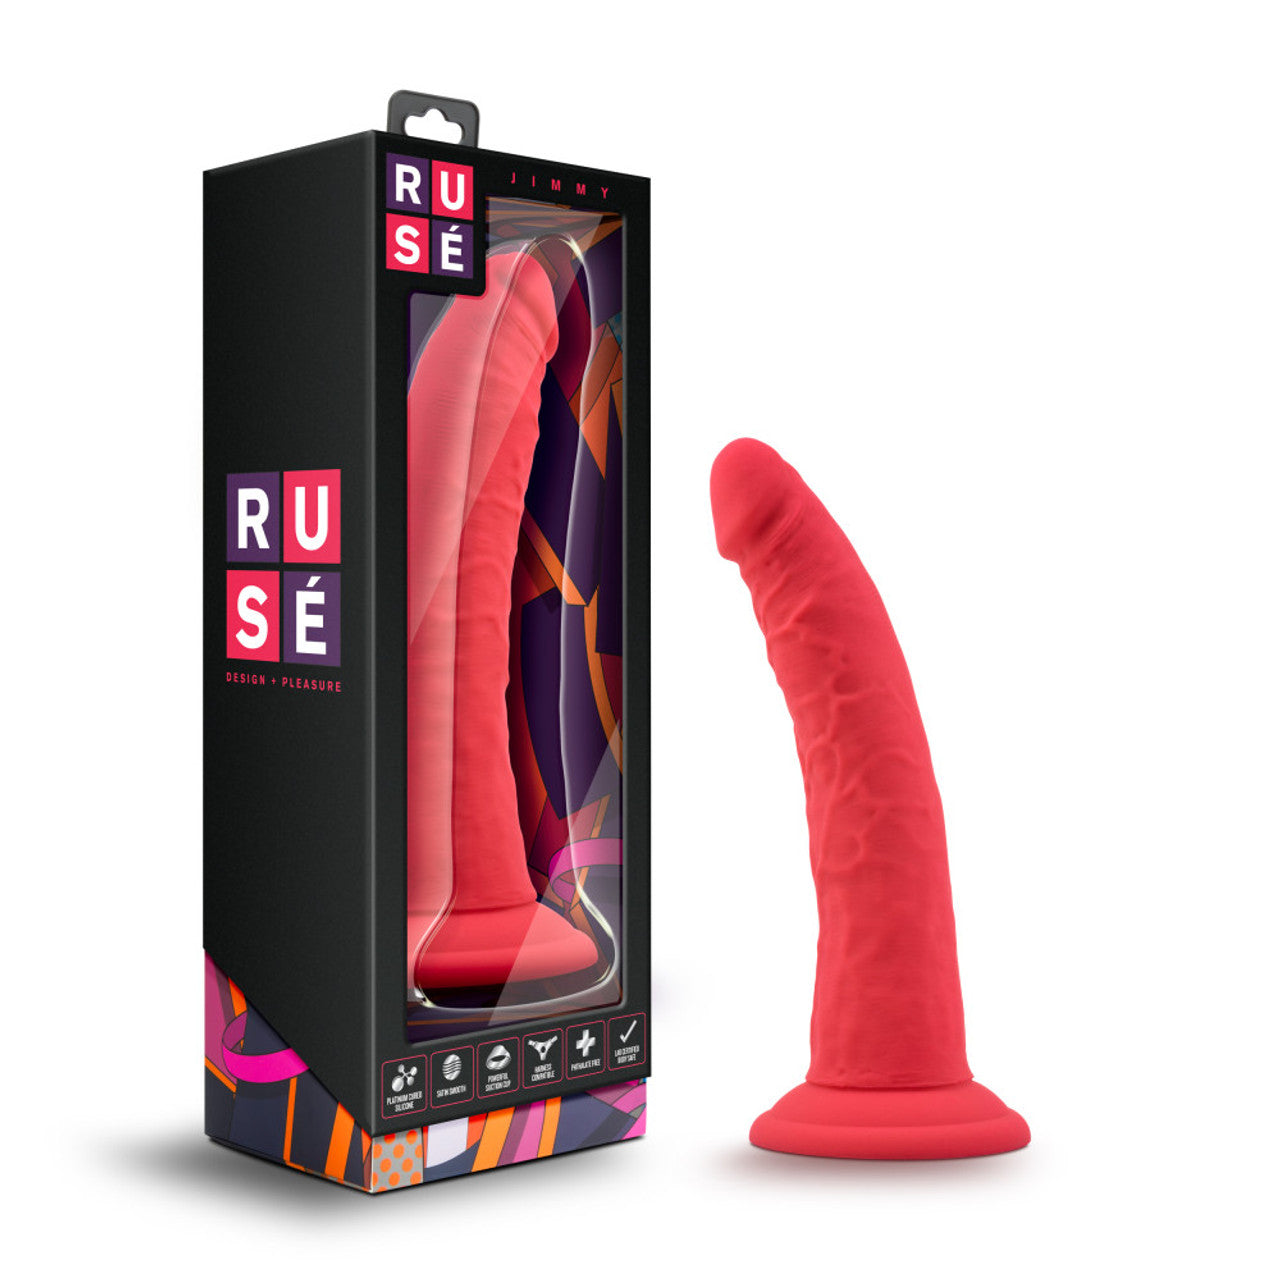 Ruse Jimmy Silicone Dildo - Cerise - Thorn & Feather